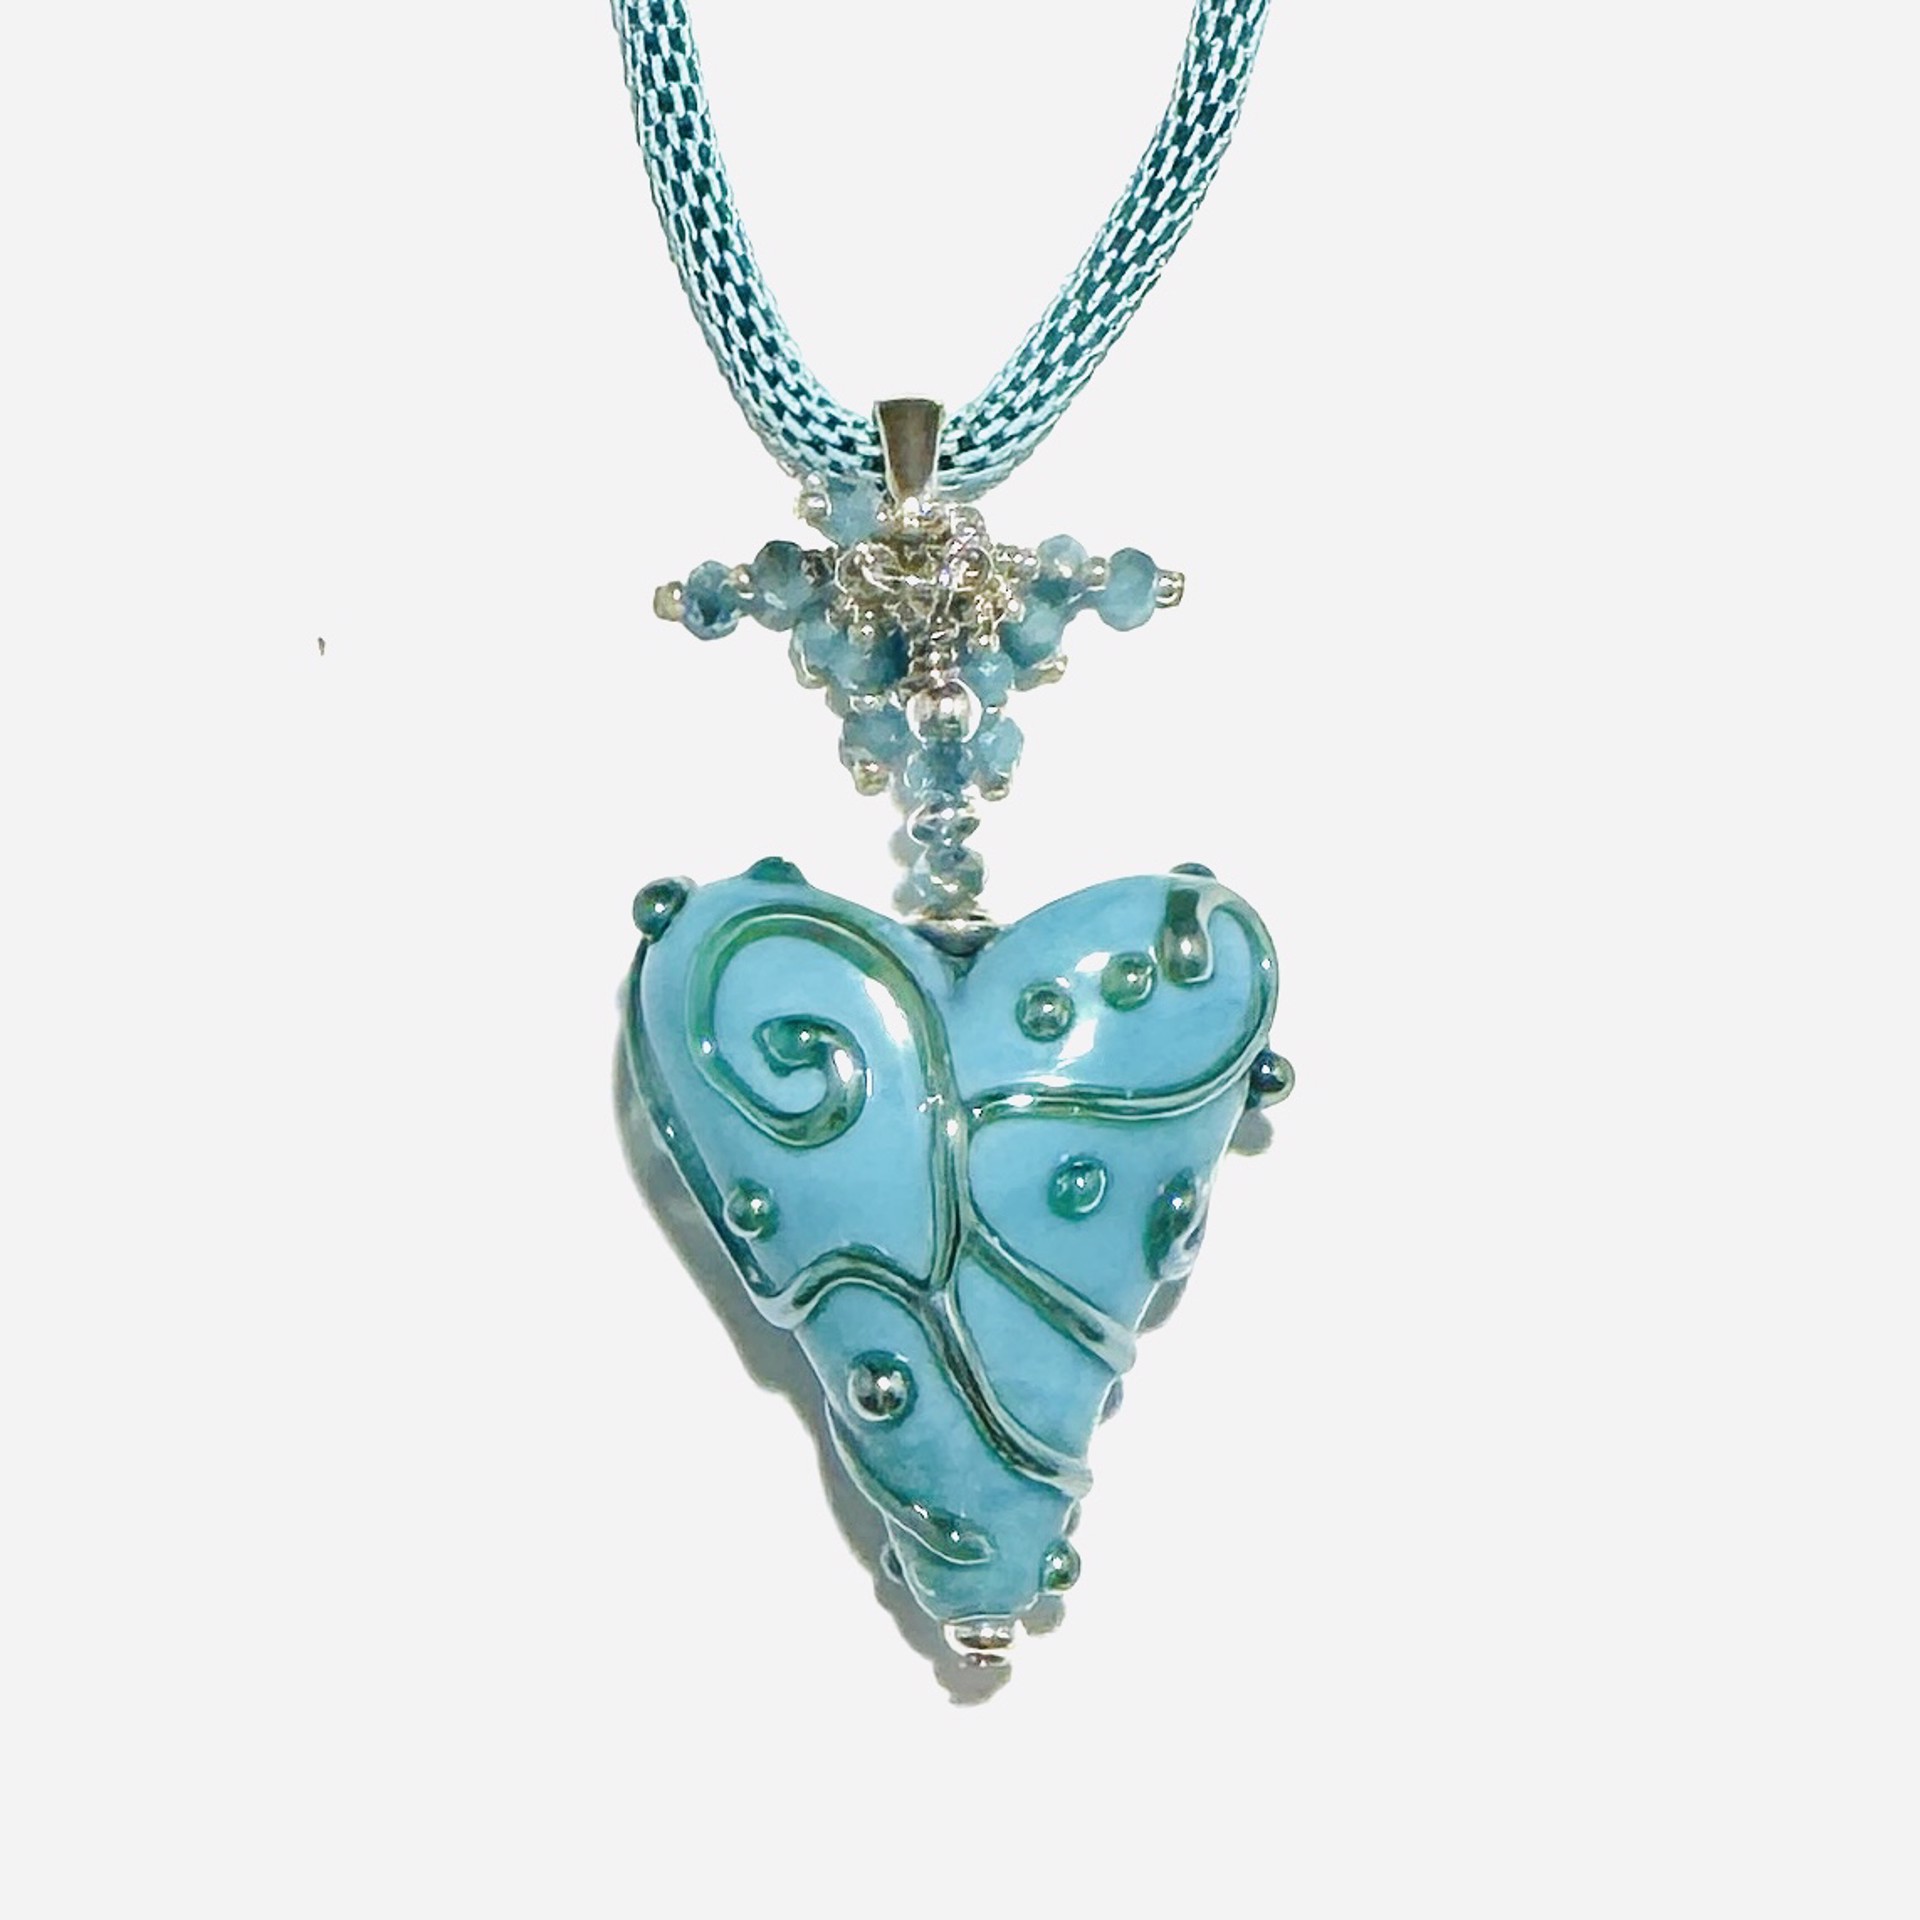 Aqua Notos Heart, Crystal Cluster, Silver Mesh Chain Necklace LS24-75 by Linda Sacra